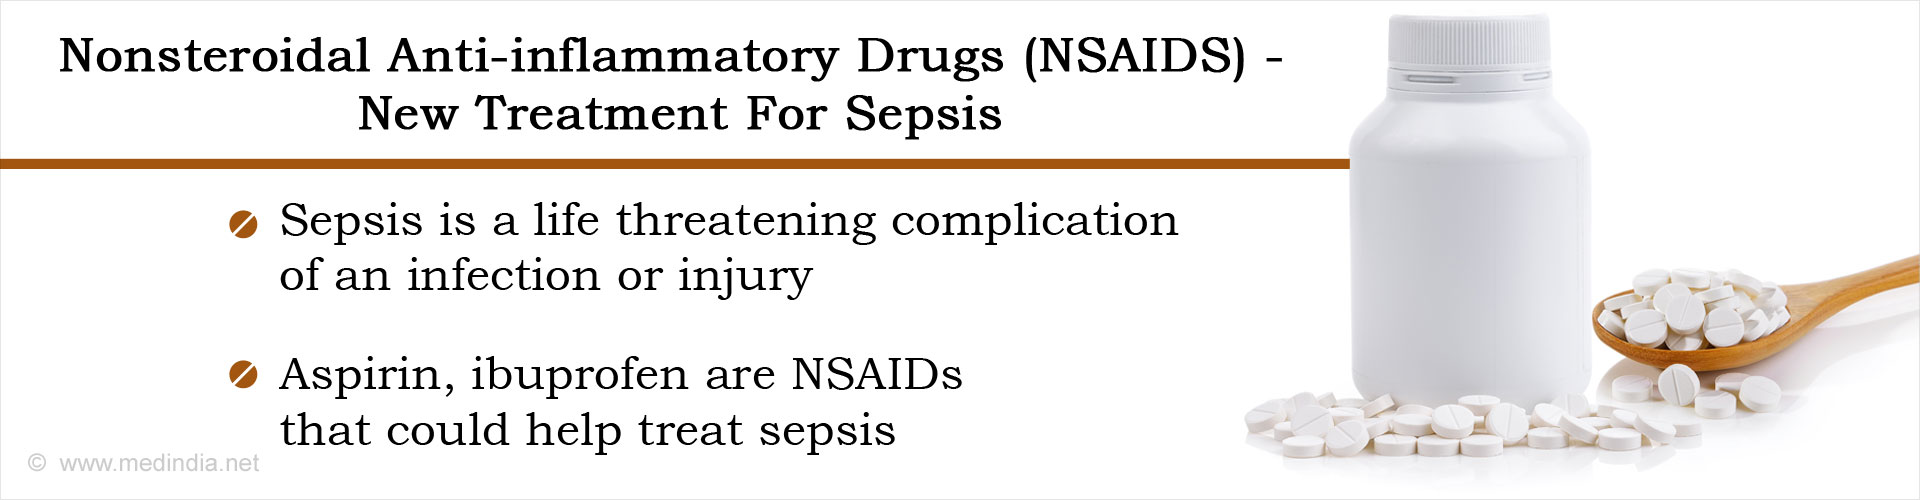 Nonsteroidal Anti-inflammatory Drugs (NSAIDS) New Treatment For Sepsis
- Sepsis is a life threatening complication of an infection or injury
- Aspirin, ibuprofen are NSAIDs that could help treat sepsis 